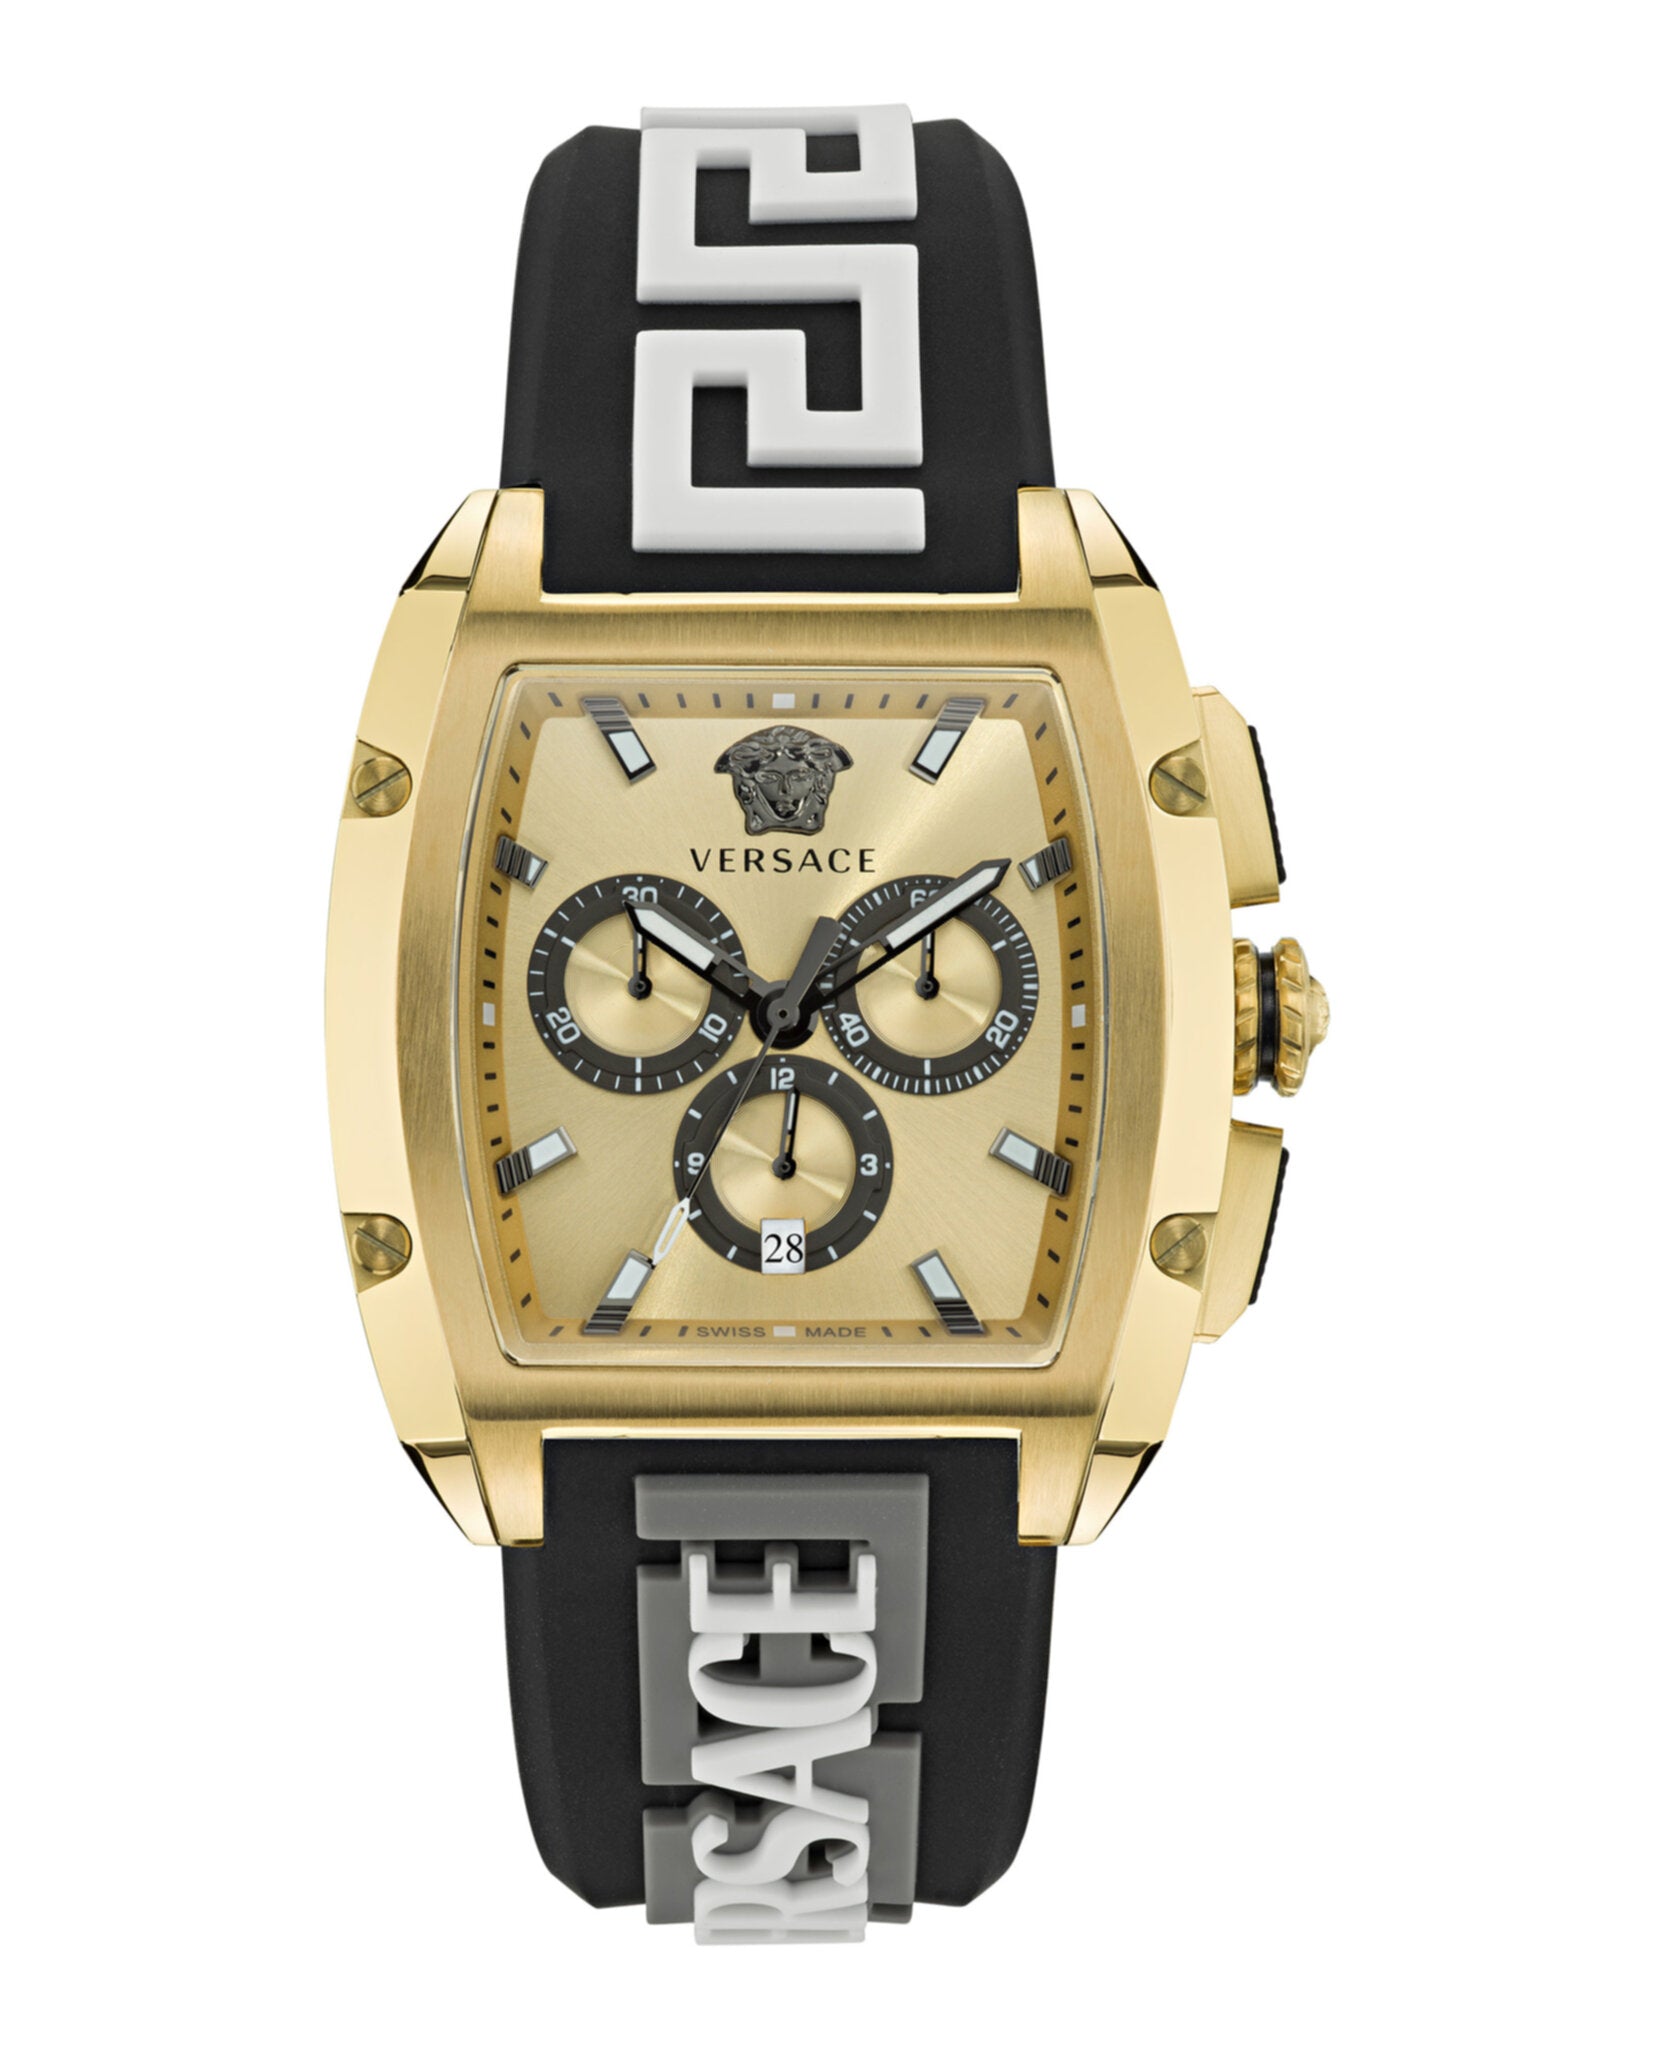 Versace Men's Dominus IP Yellow Gold Silicone Strap Watch, 42mm Pnul